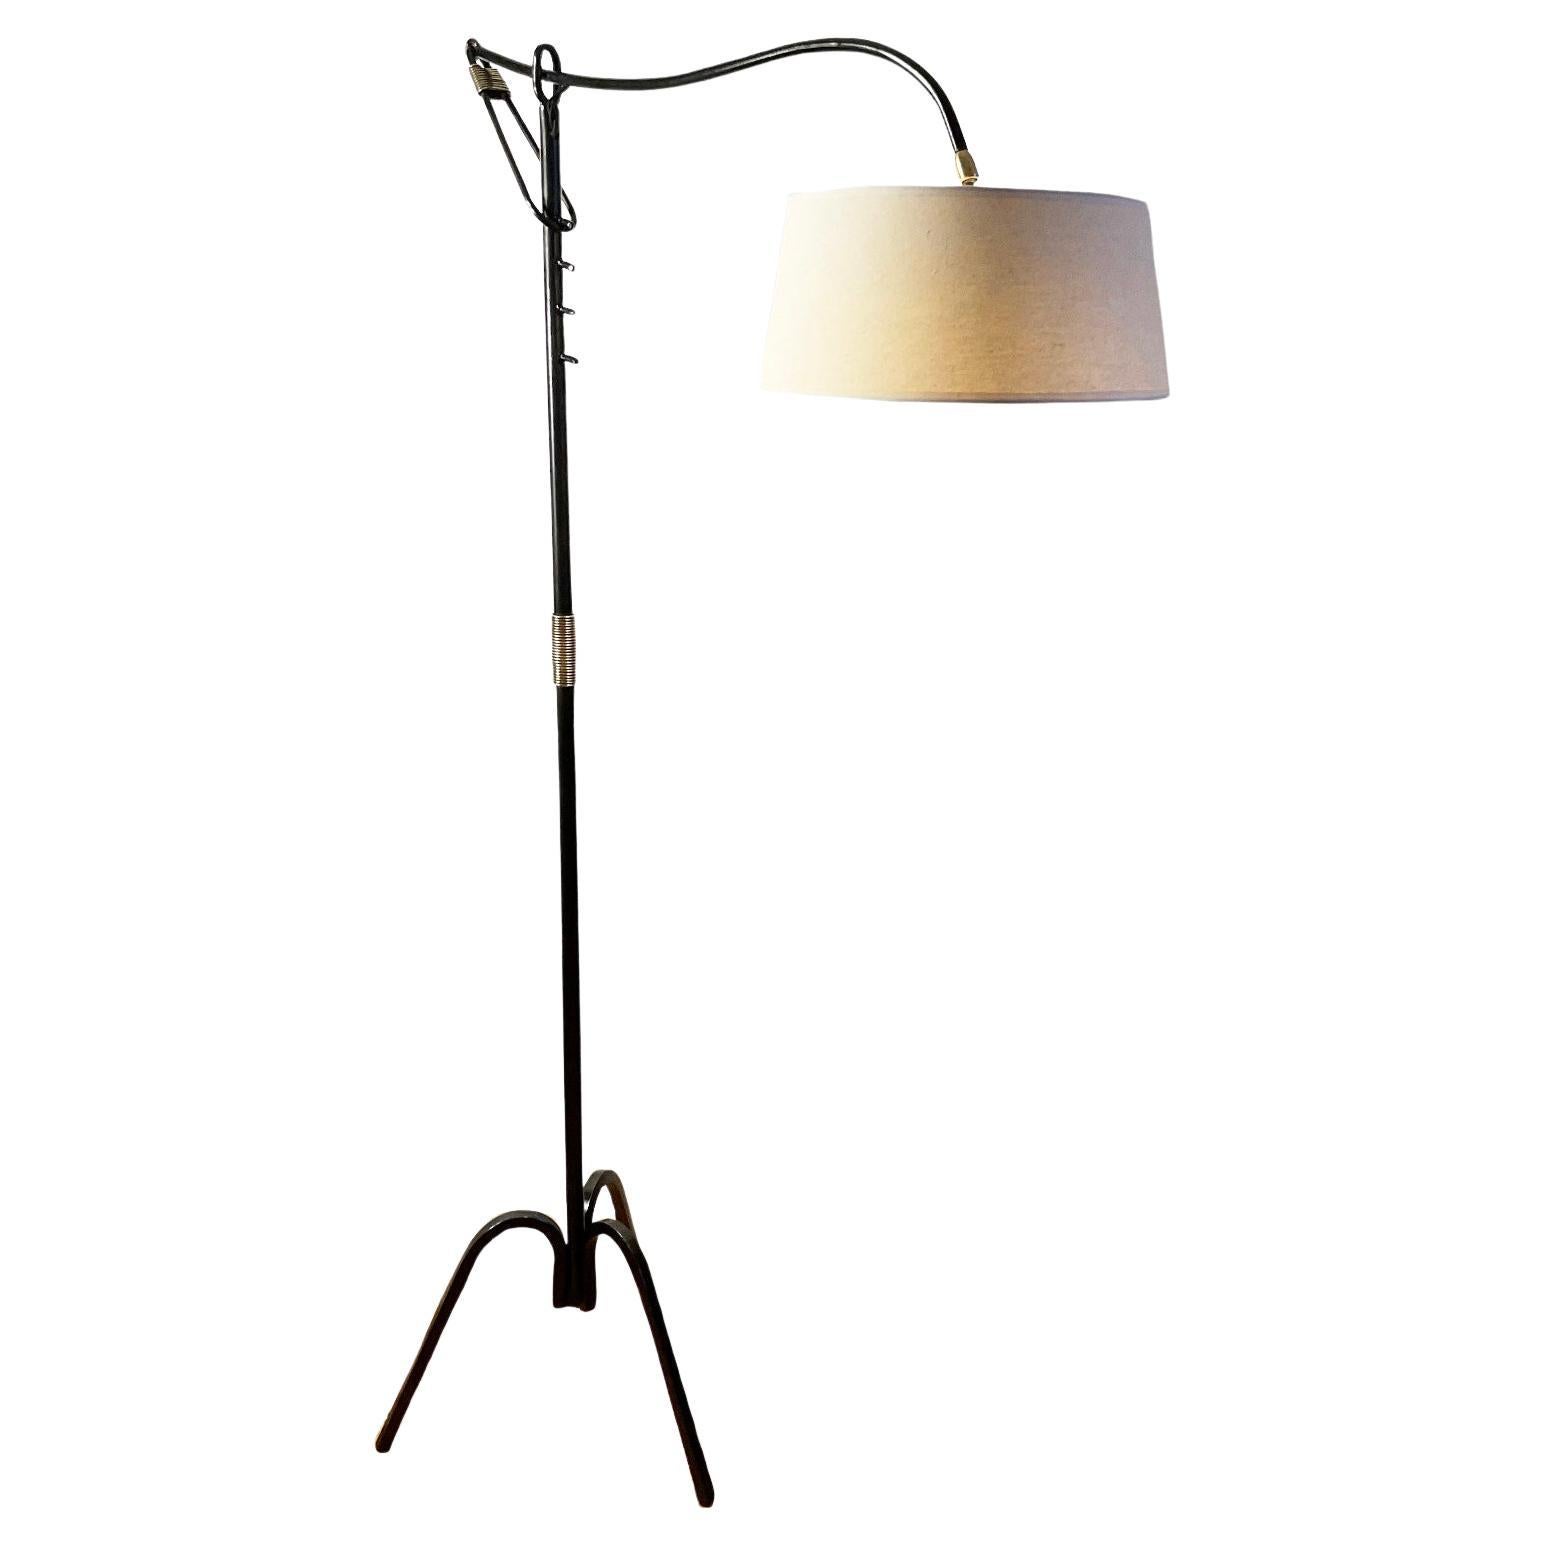 1950s Floor Lamp Attributed to Jacques Adnet with a Crémallière system